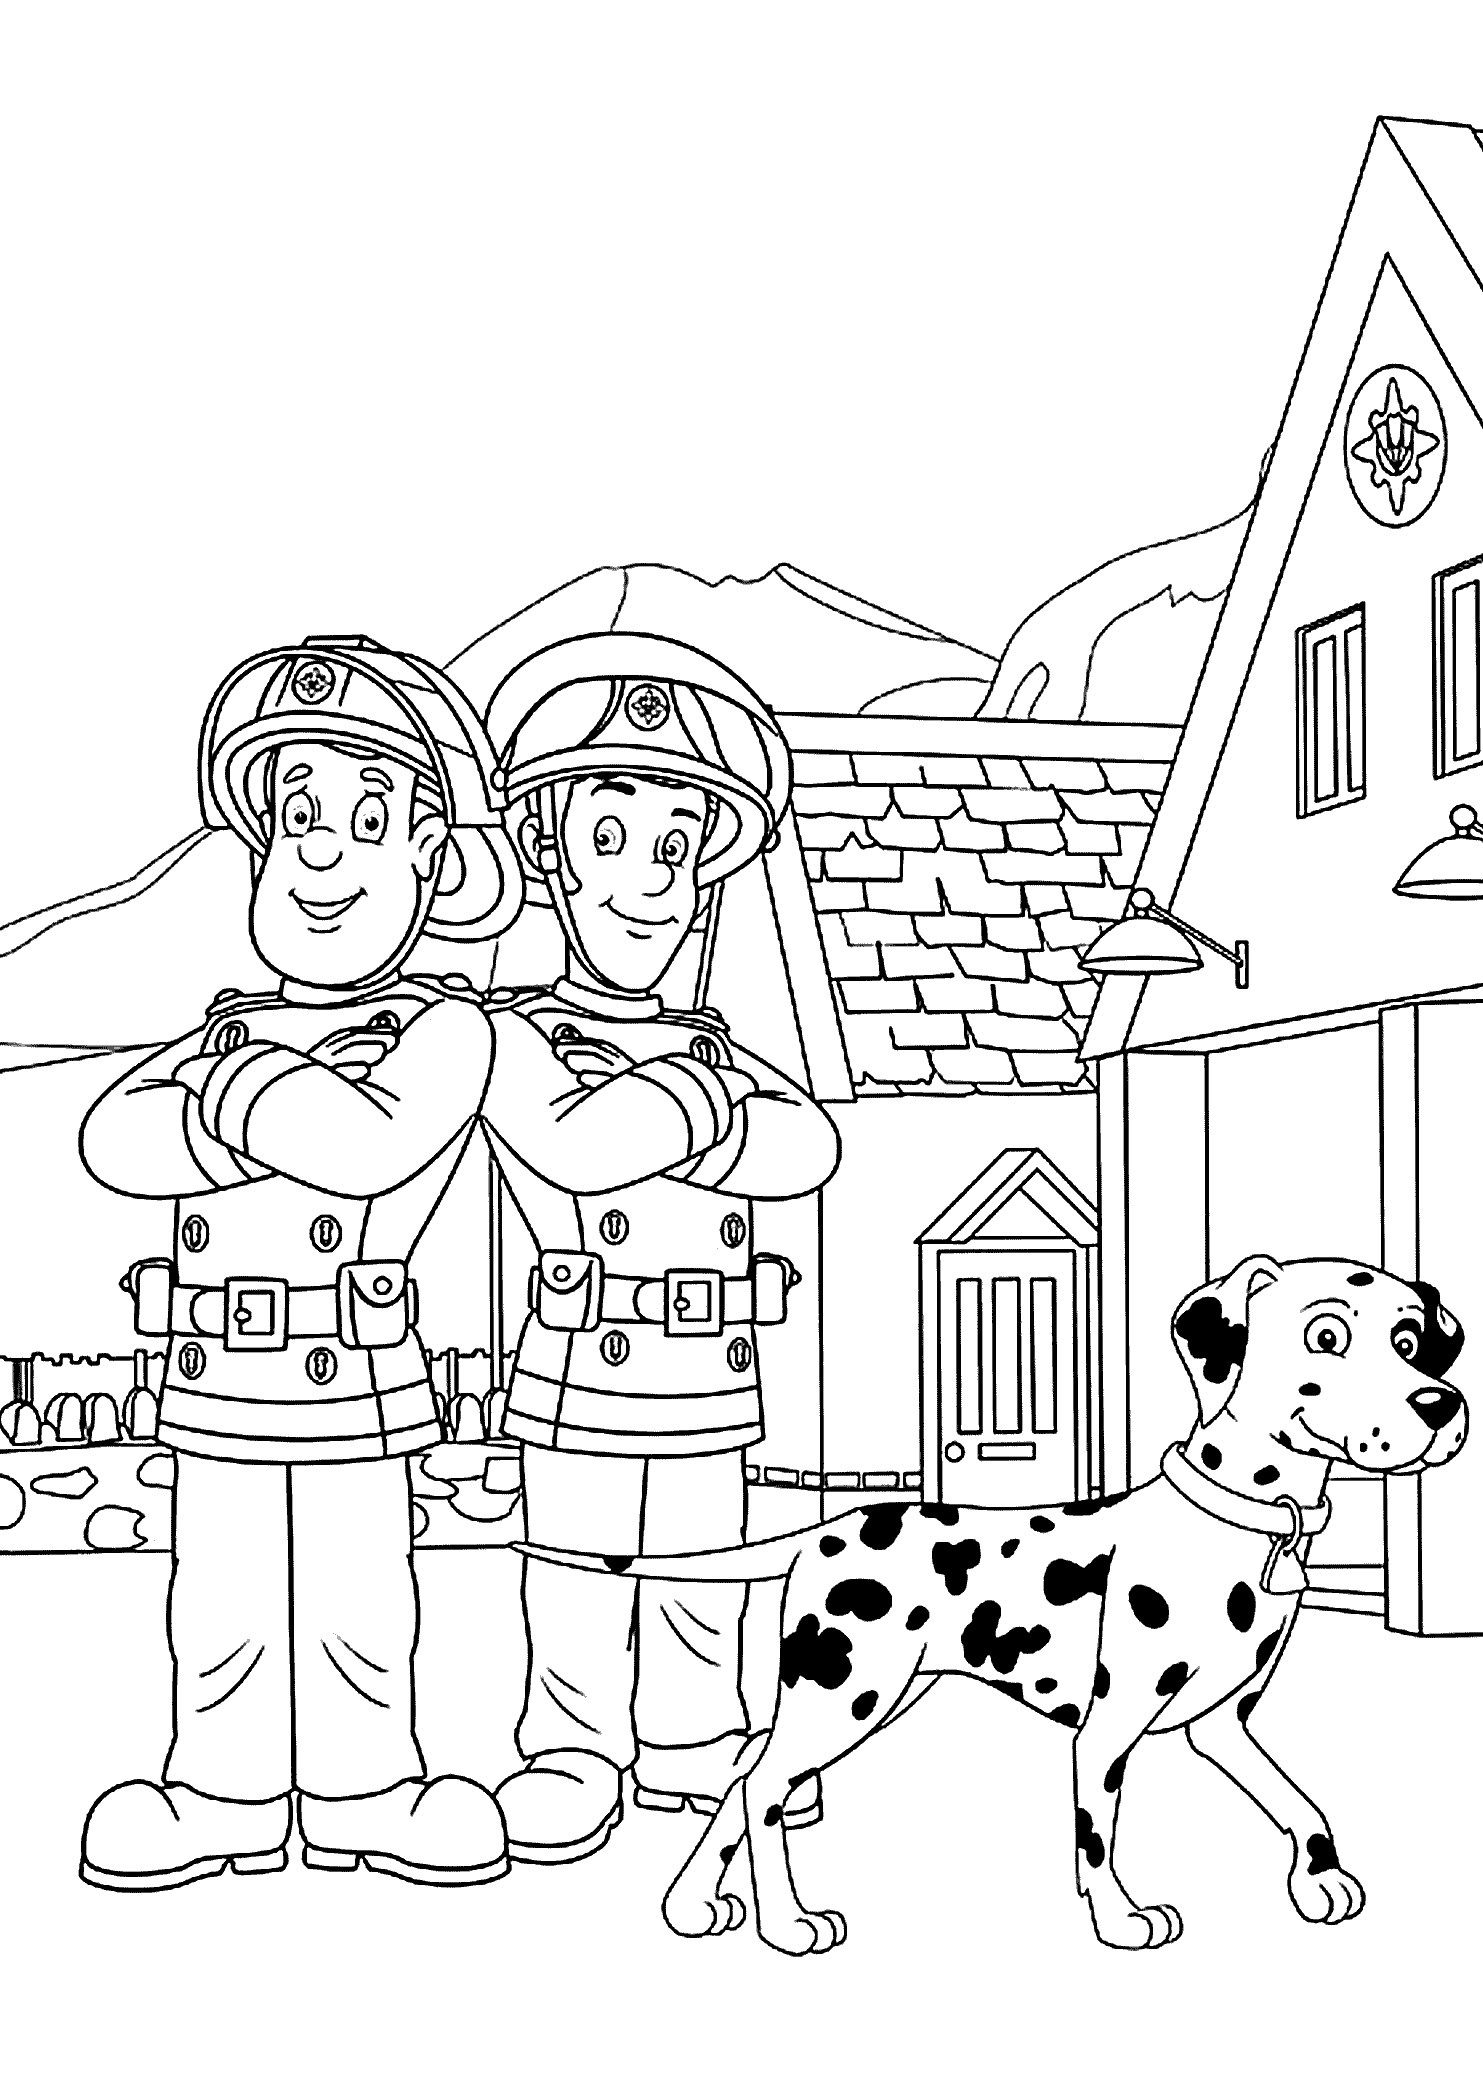 Amazing Image Of Fireman Coloring Fireman Coloring Pages coloring pages  fireman for coloring fireman sam colouring sheets fireman colouring  pictures fireman colouring in firefighter coloring sheet I trust coloring  pages.